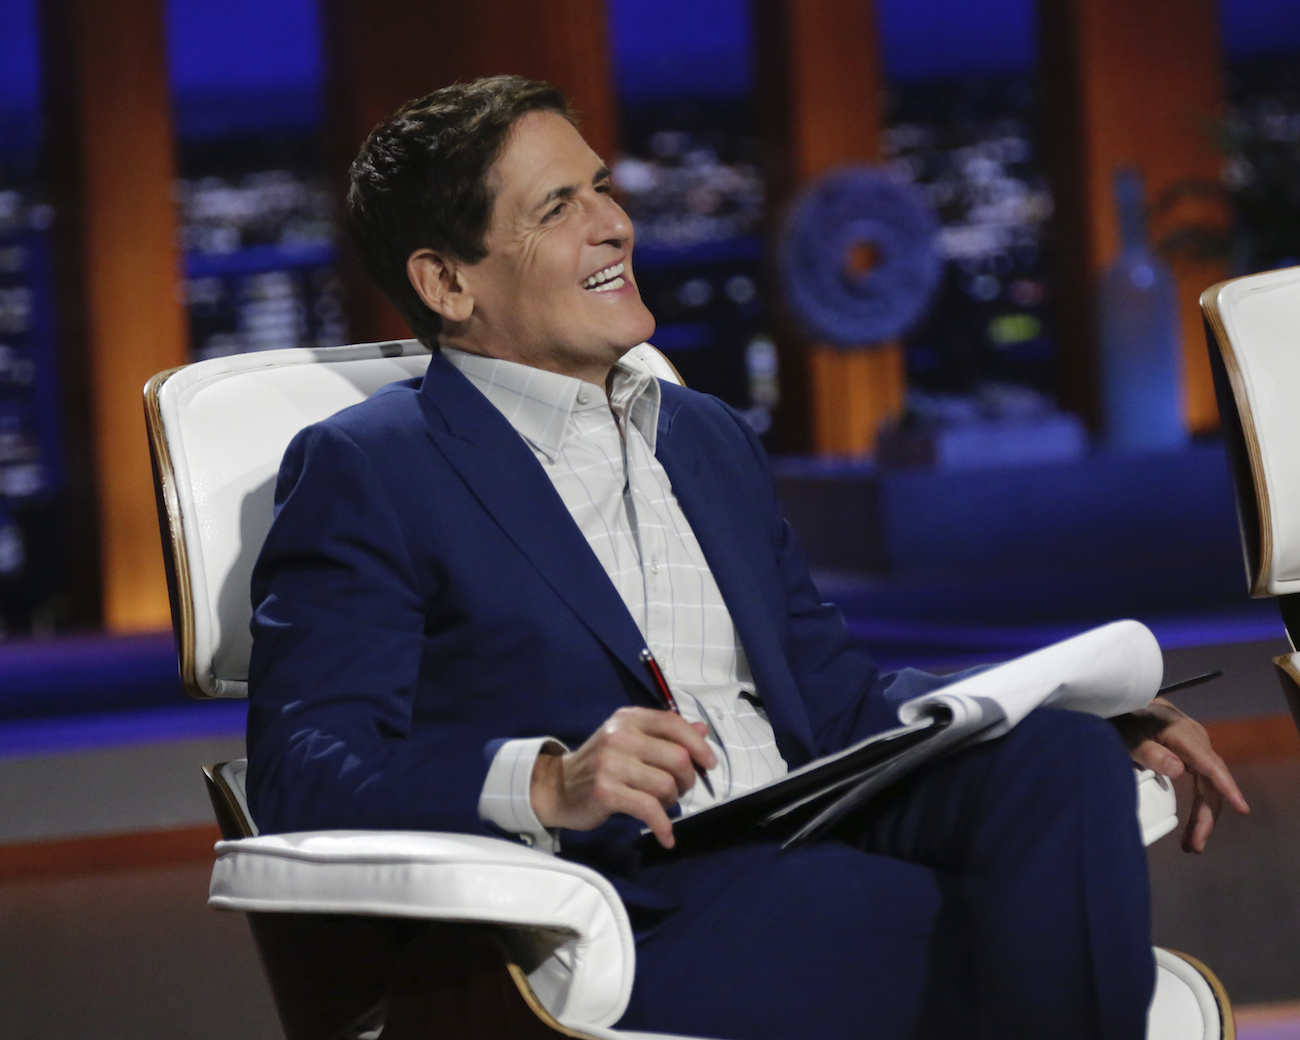 Mark Cuban sitting on the panel of of 'Shark Tank' smiling in a dark jacket and white shirt